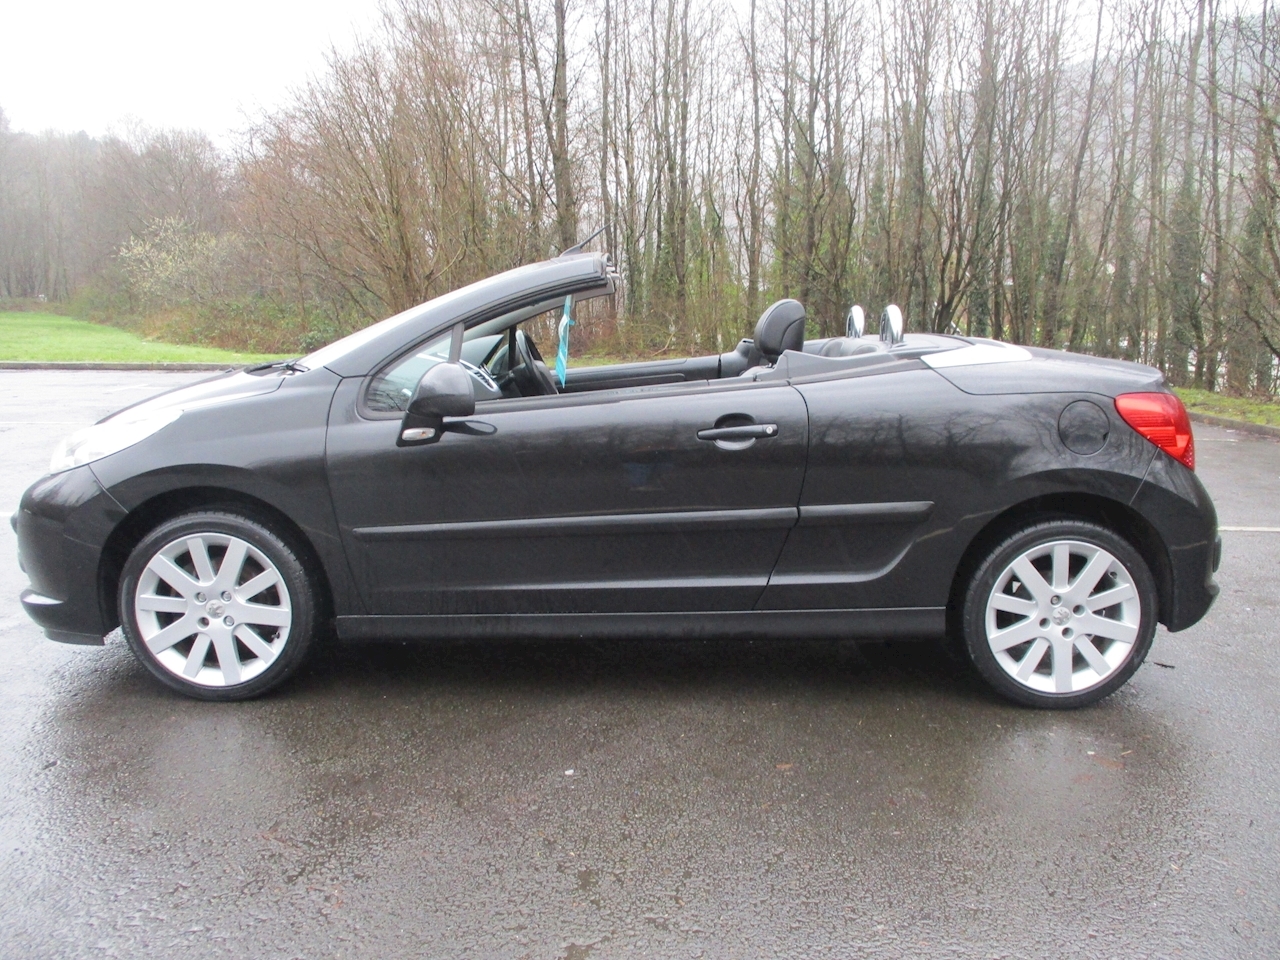 207 Gt Coupe Cabriolet Convertible 1.6 Manual Petrol